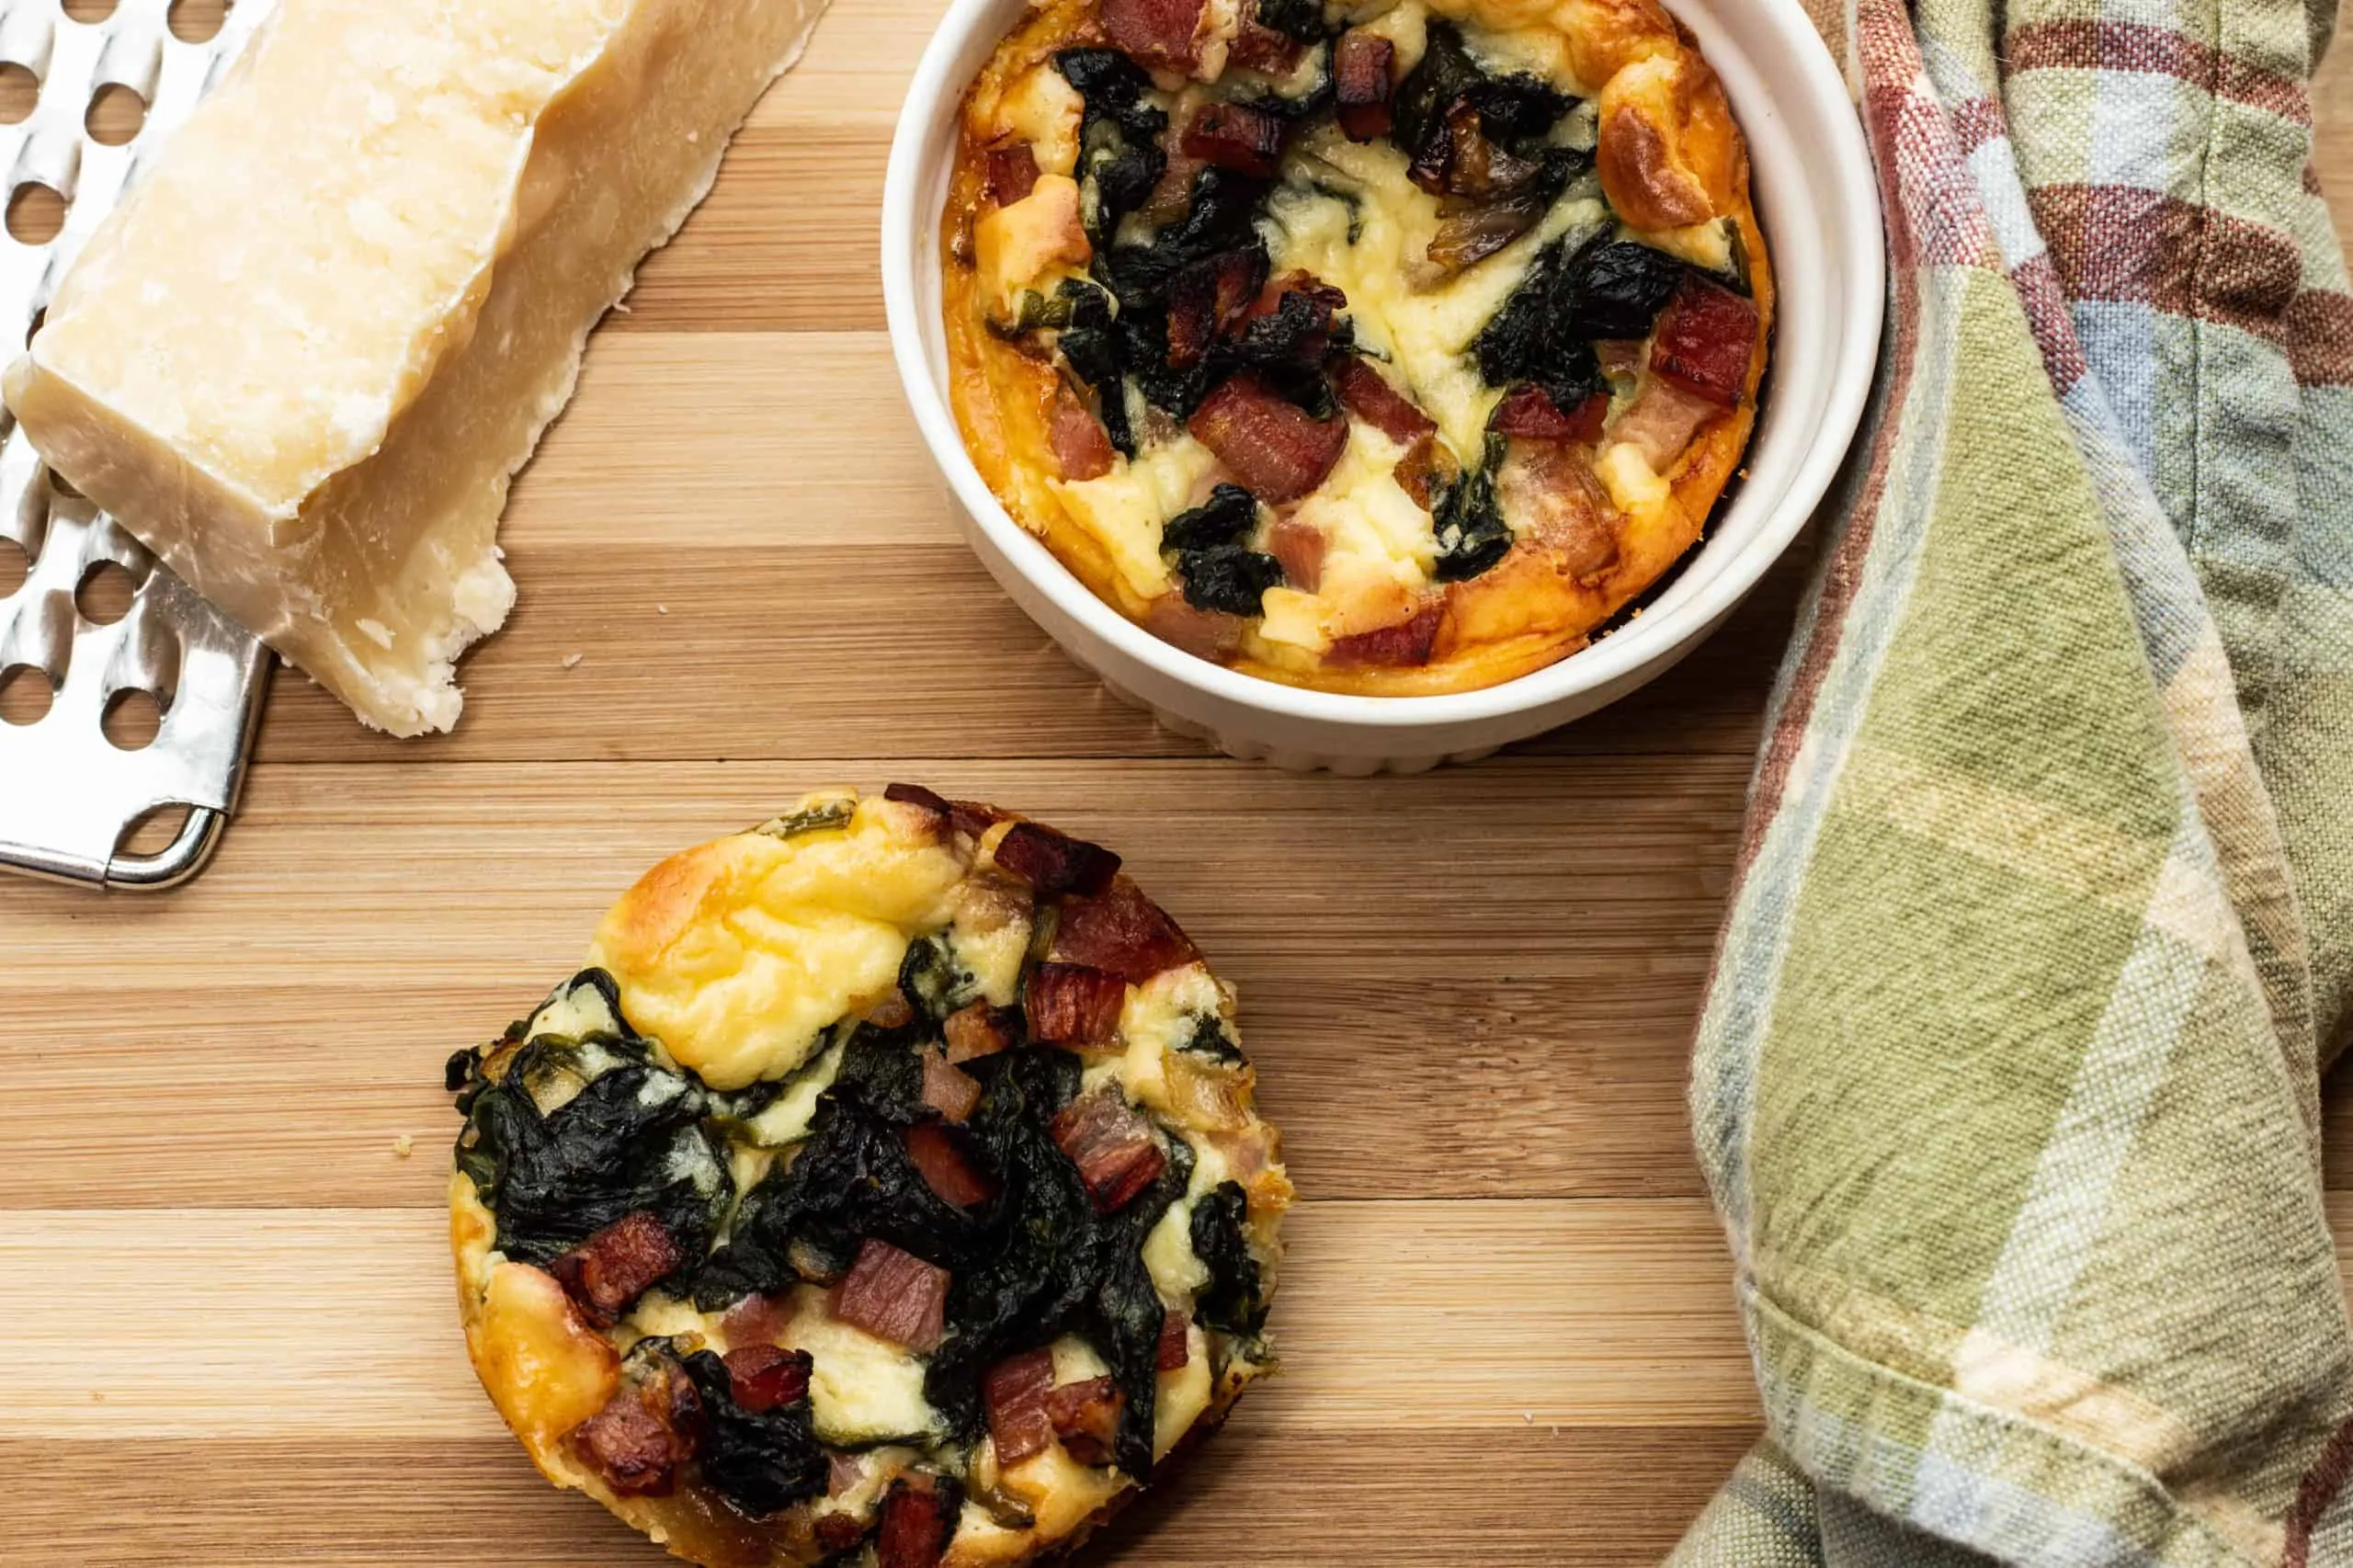 Melt-in-your-mouth light and full of savory goodness, these keto Ham, Spinach & Cheese Custards are perfect for breakfast or brunch.